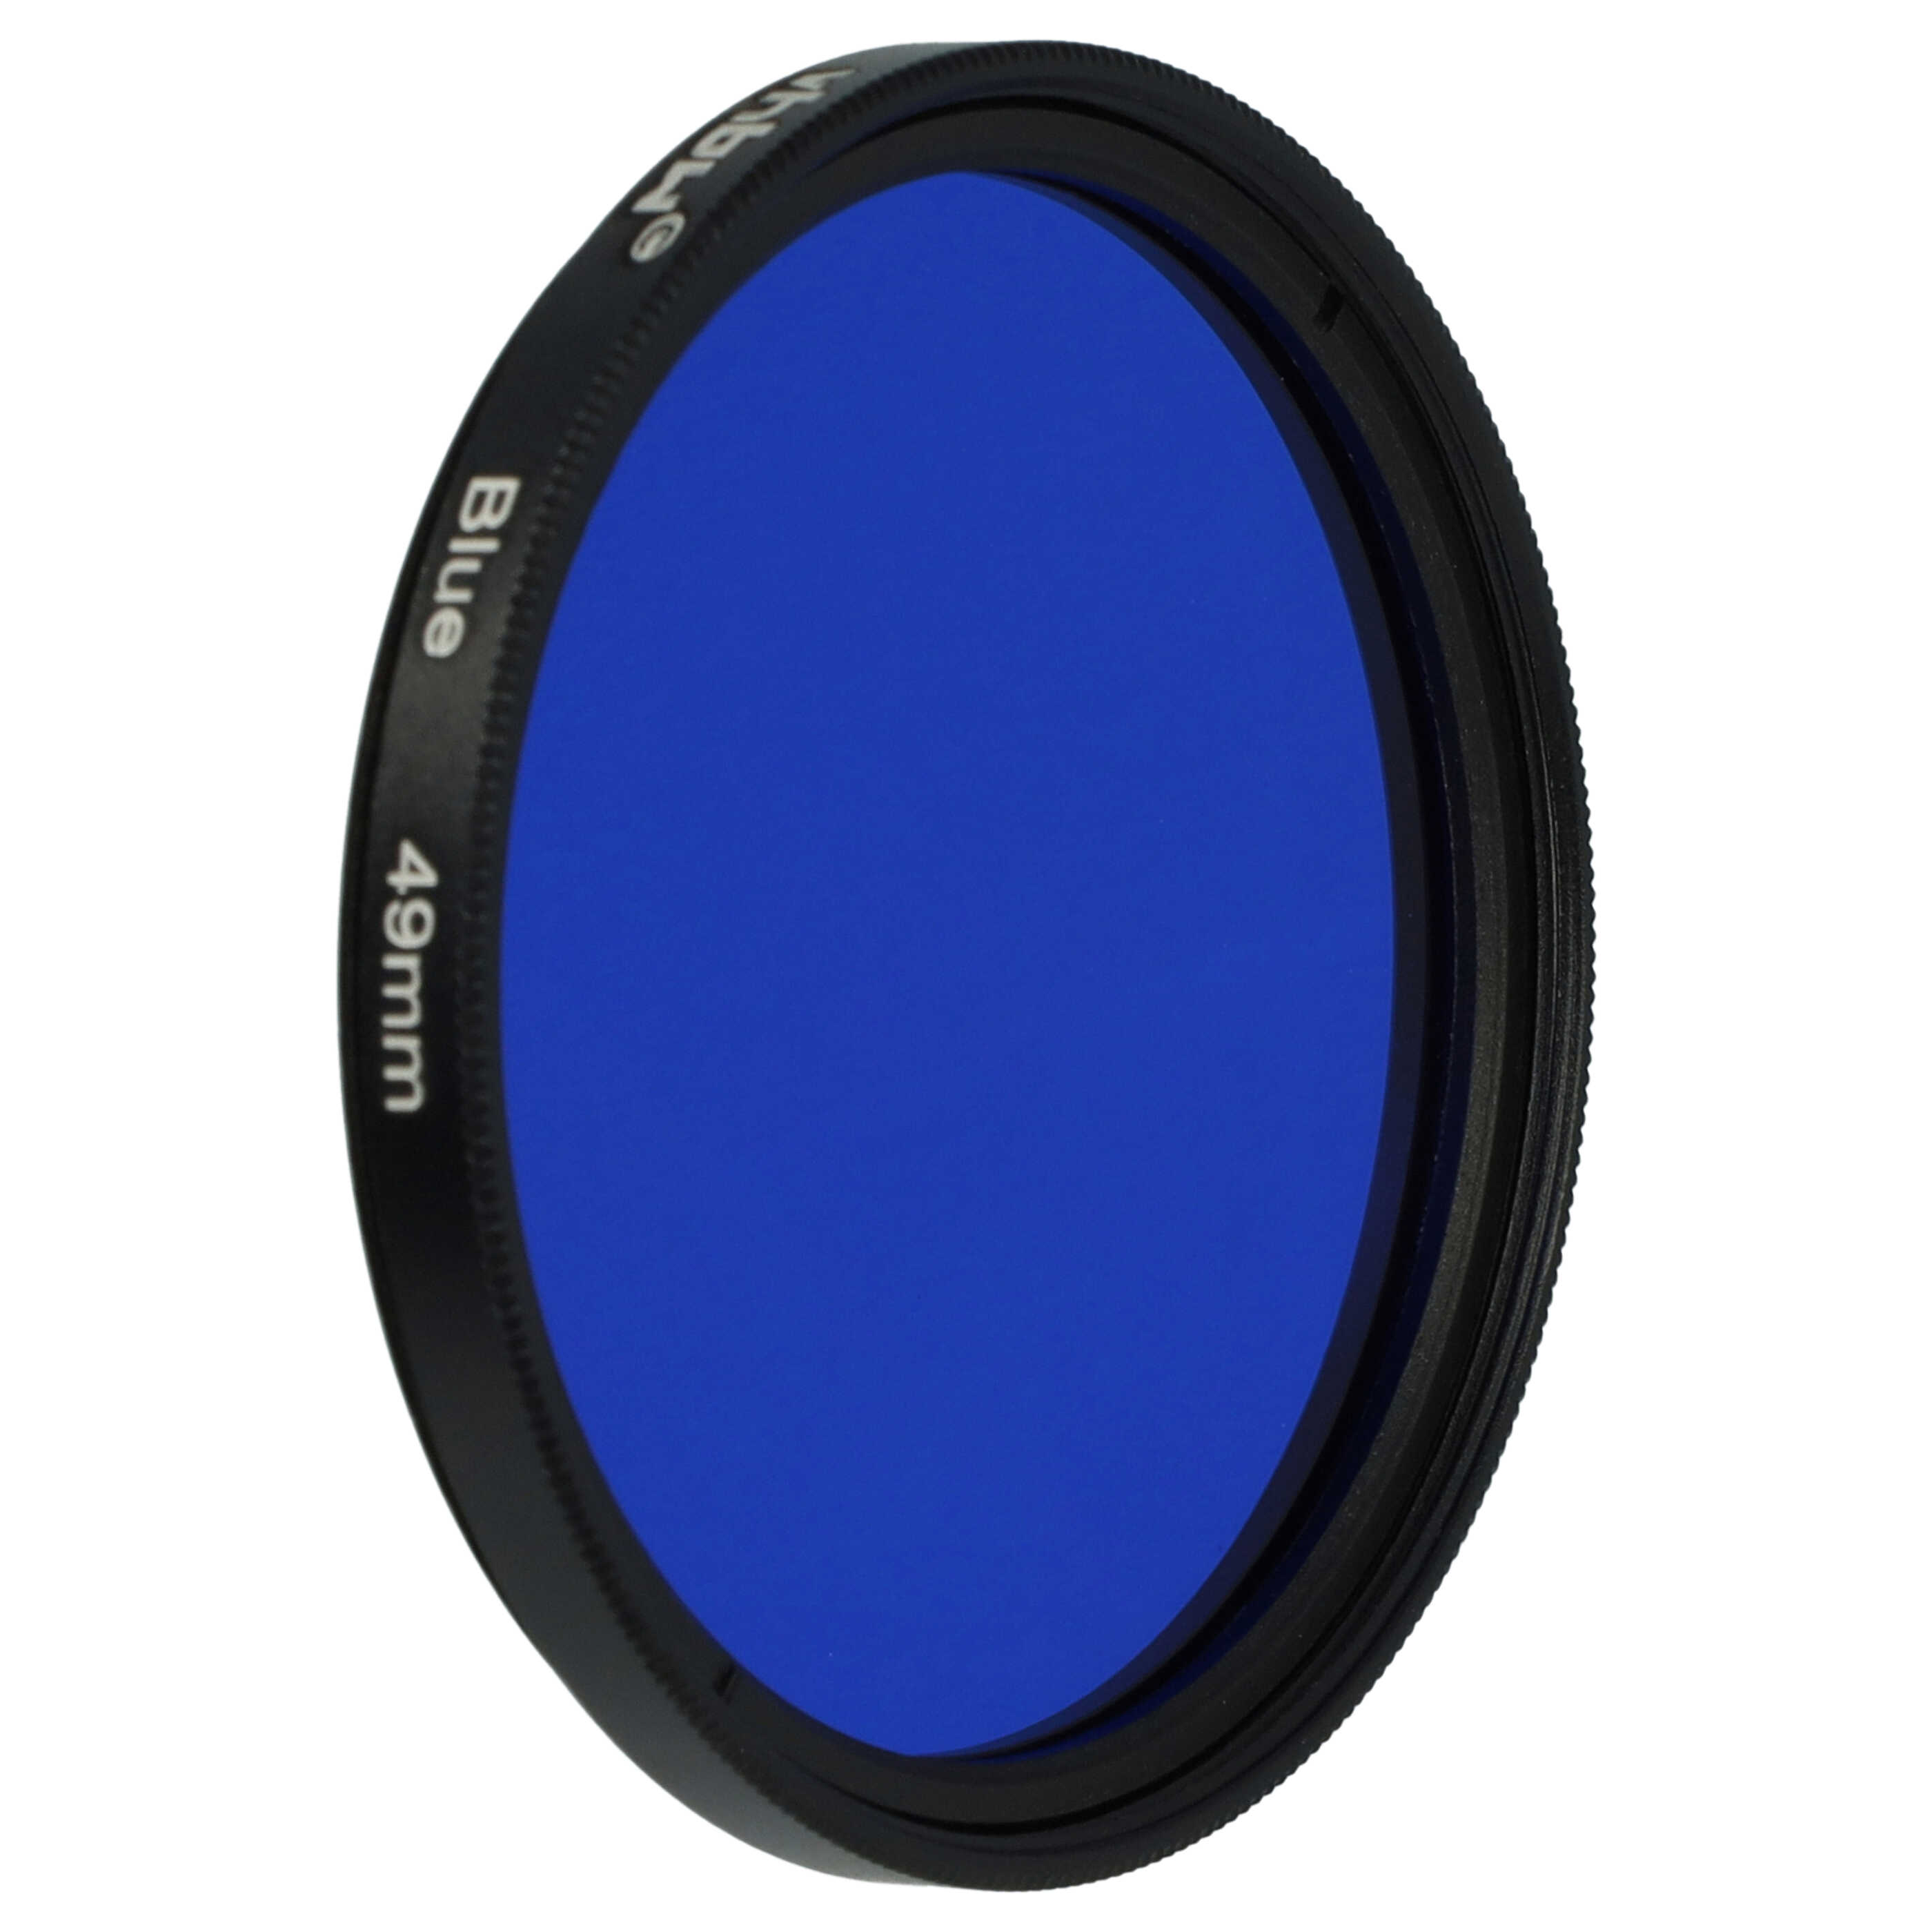 Coloured Filter, Blue suitable for Camera Lenses with 49 mm Filter Thread - Blue Filter